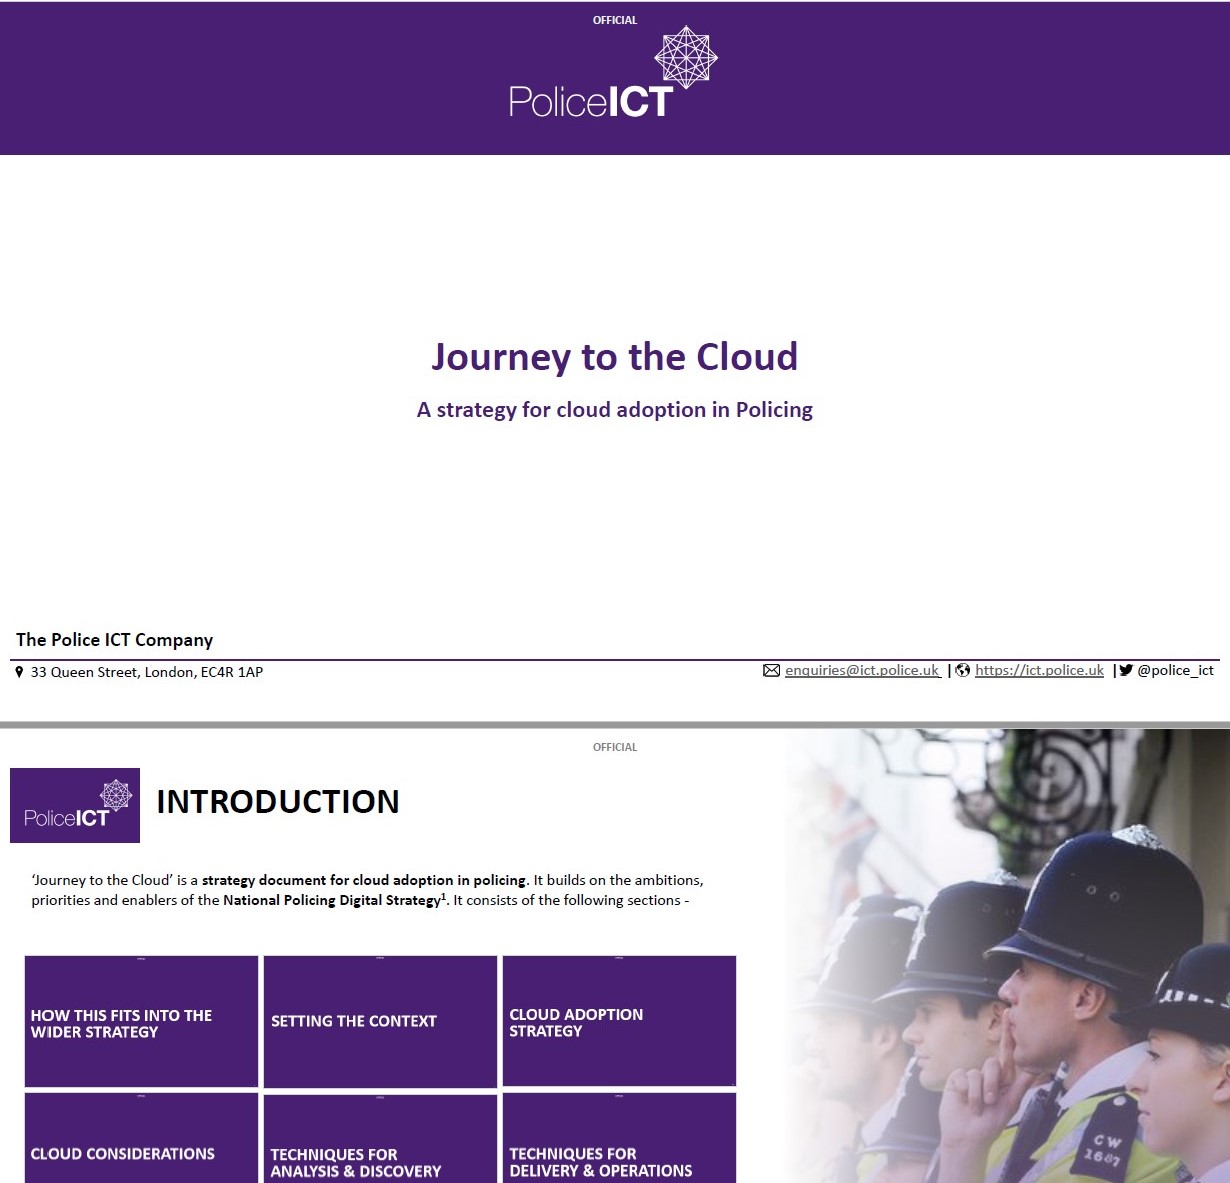 journey-to-cloud-strategy-image